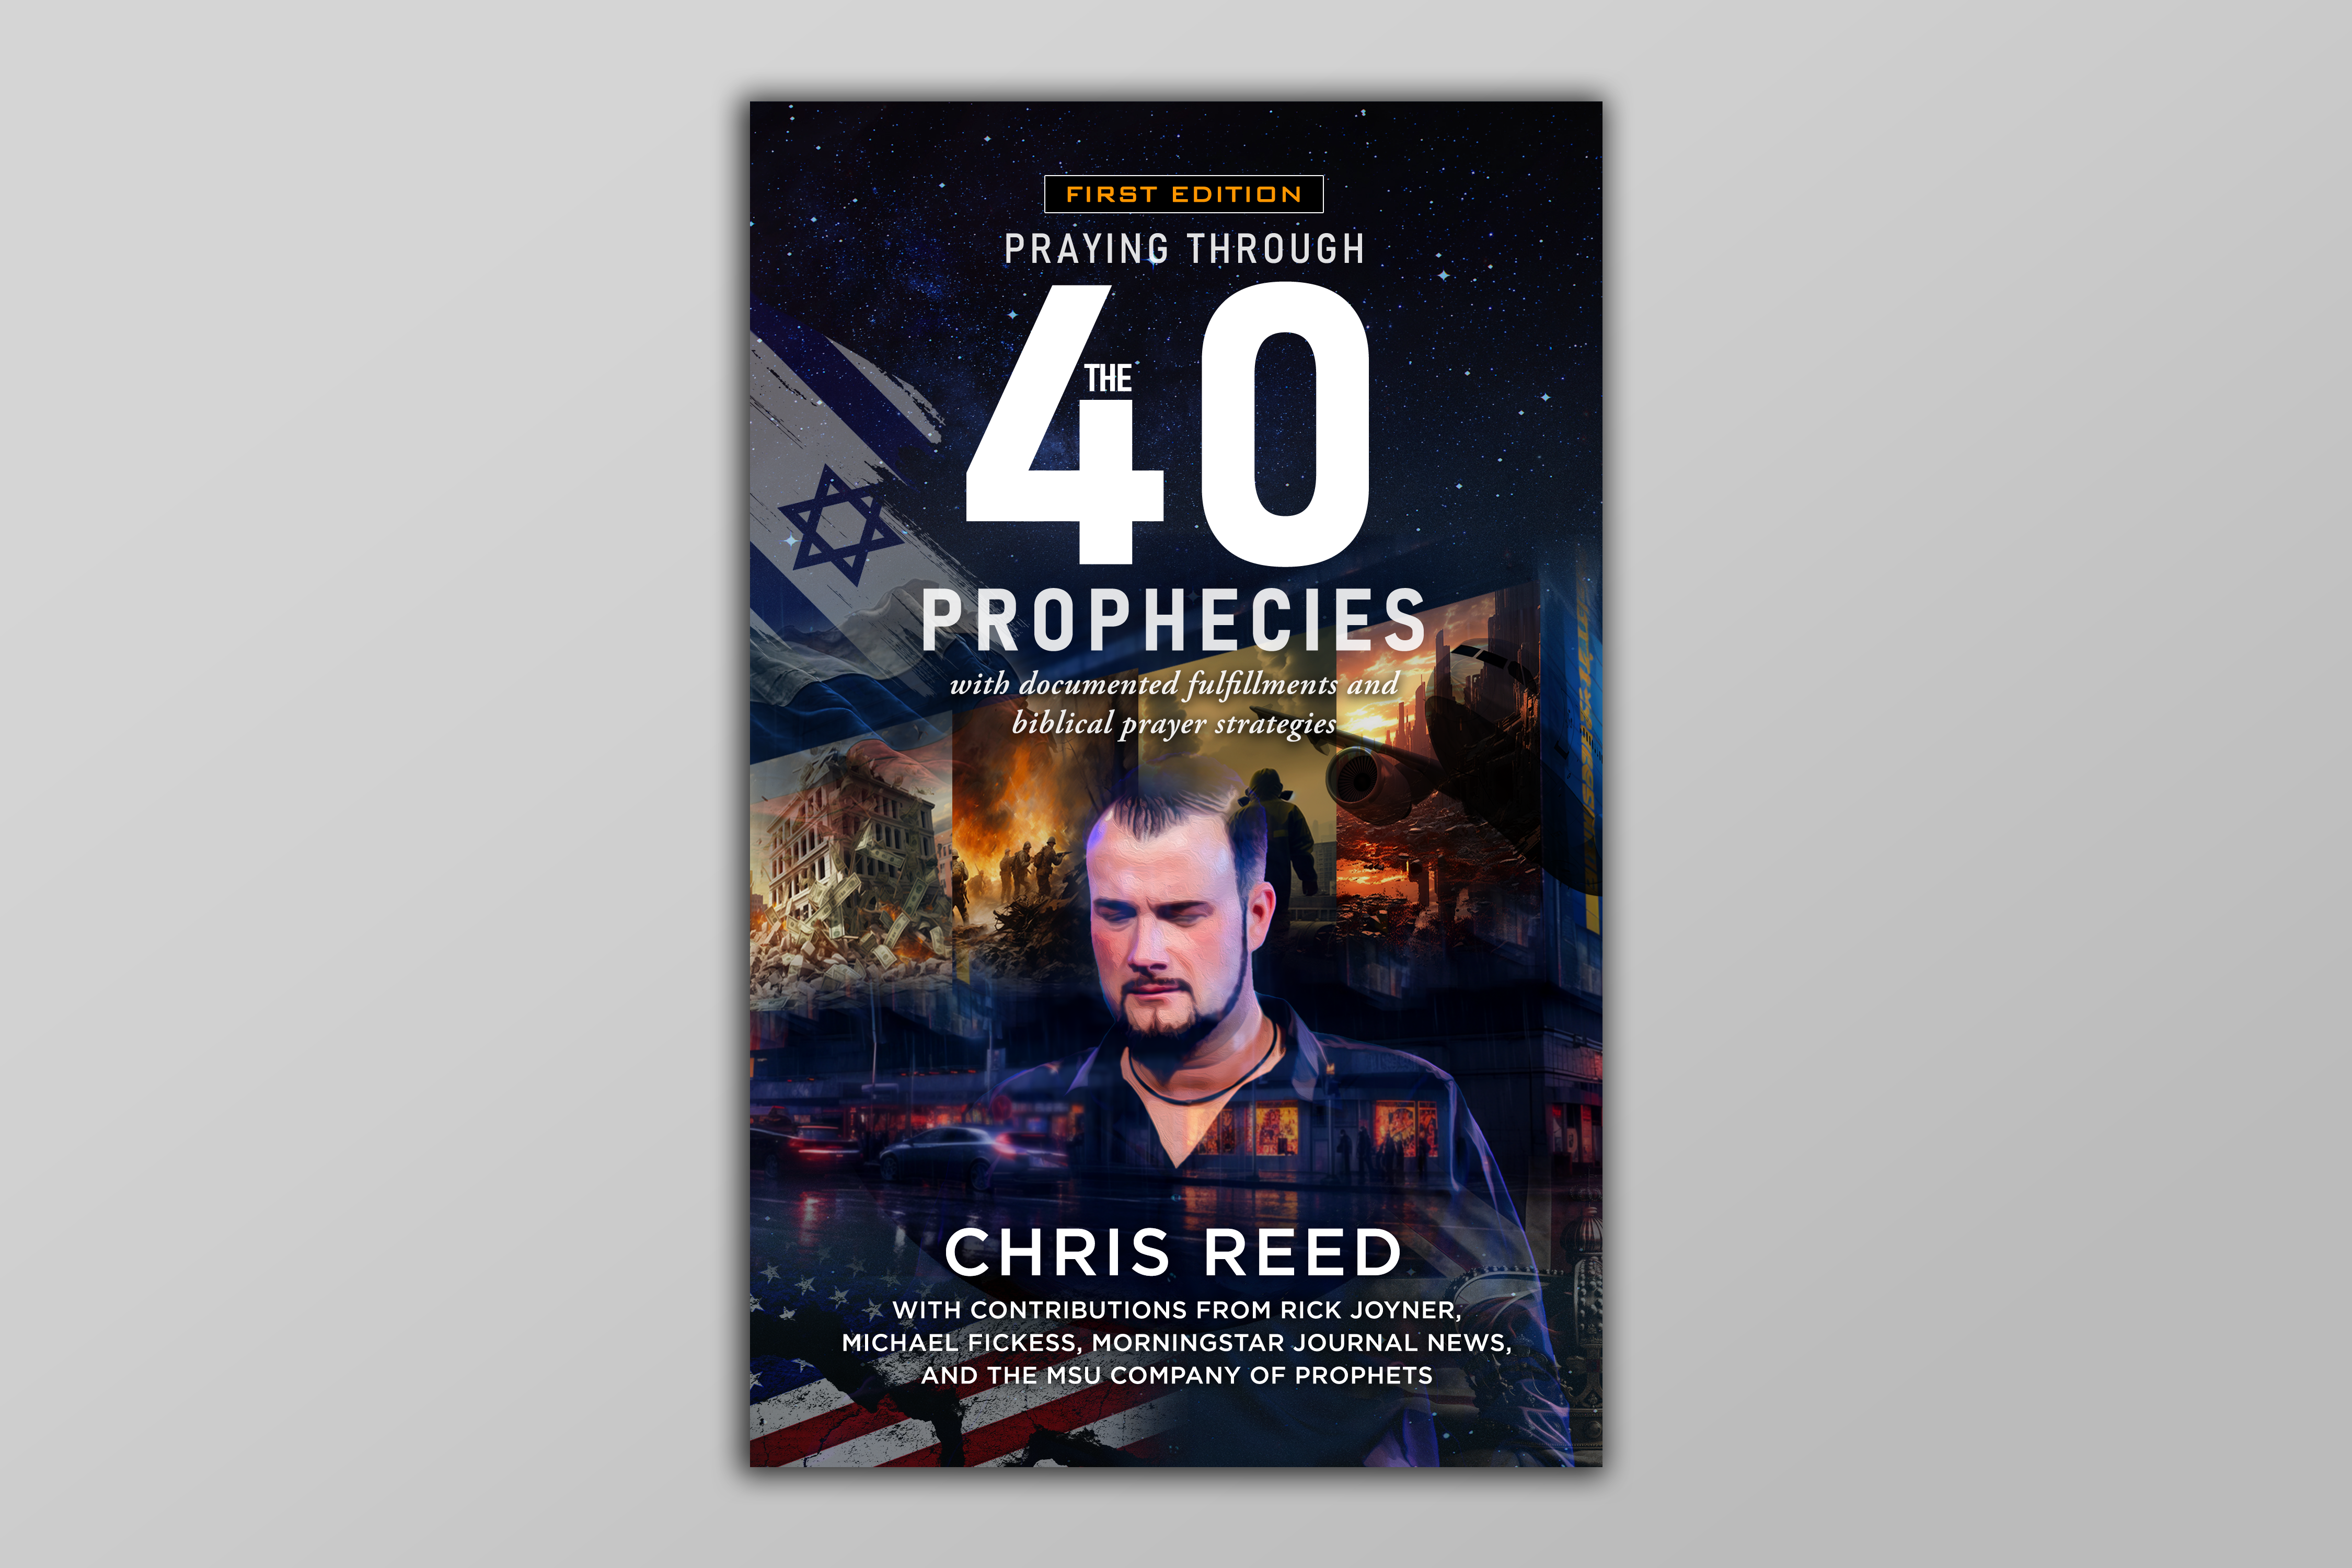 Praying through the 40 Prophecies by Chris Reed (Collaborative)